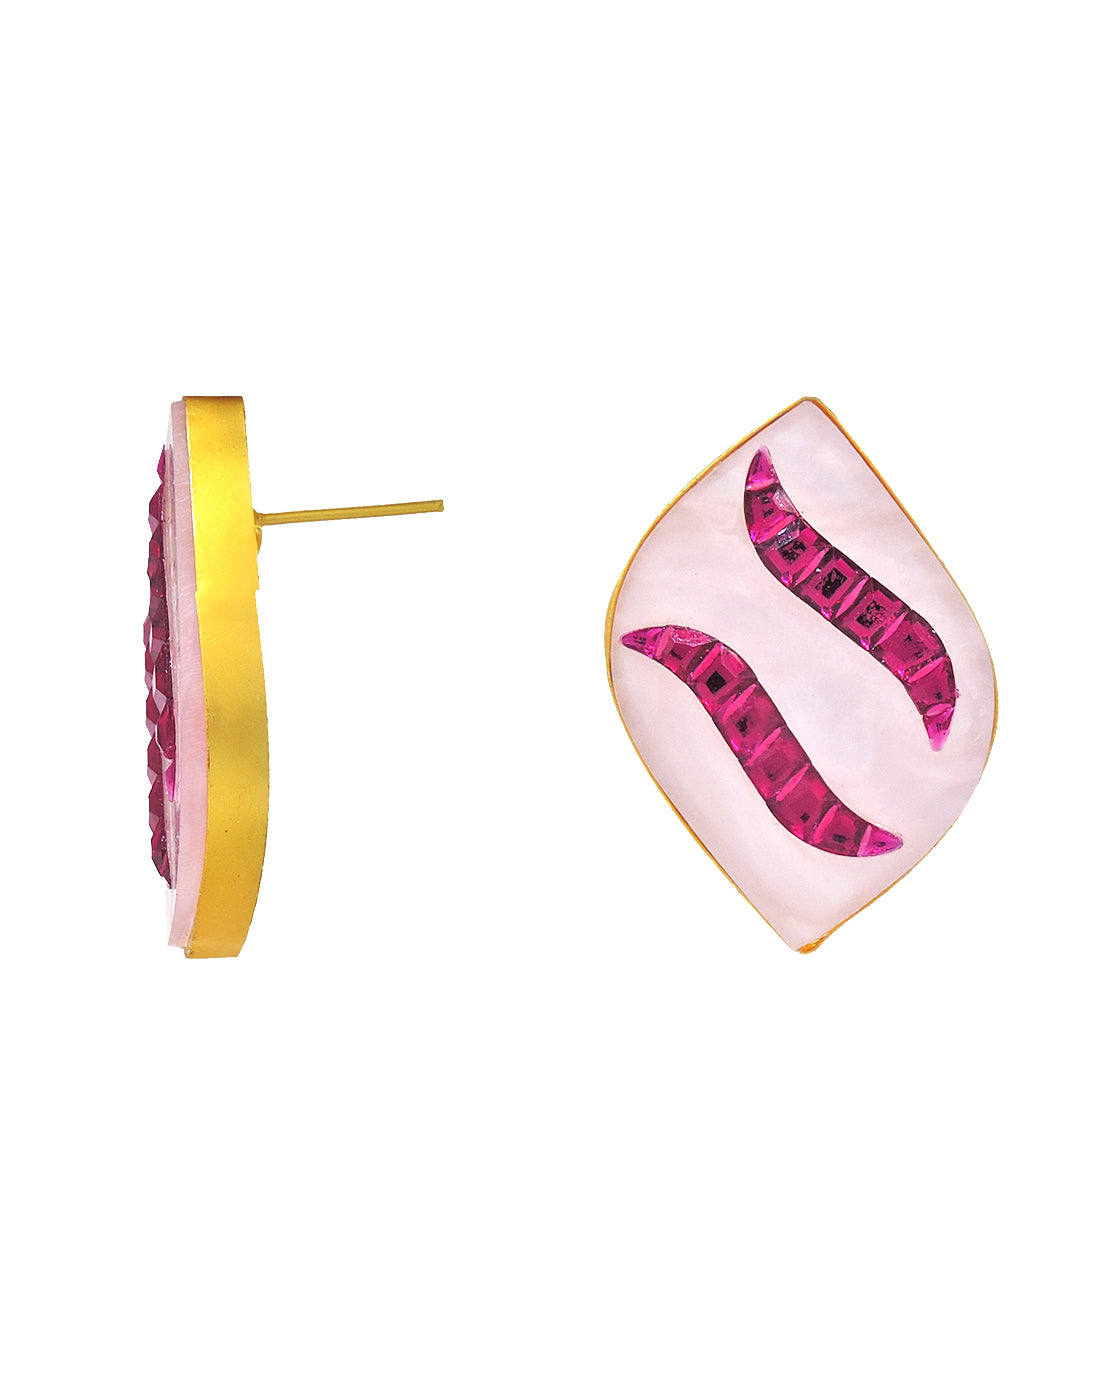 Double Wave Earrings - Statement Earrings - Gold-Plated & Hypoallergenic - Made in India - Dubai Jewellery - Dori